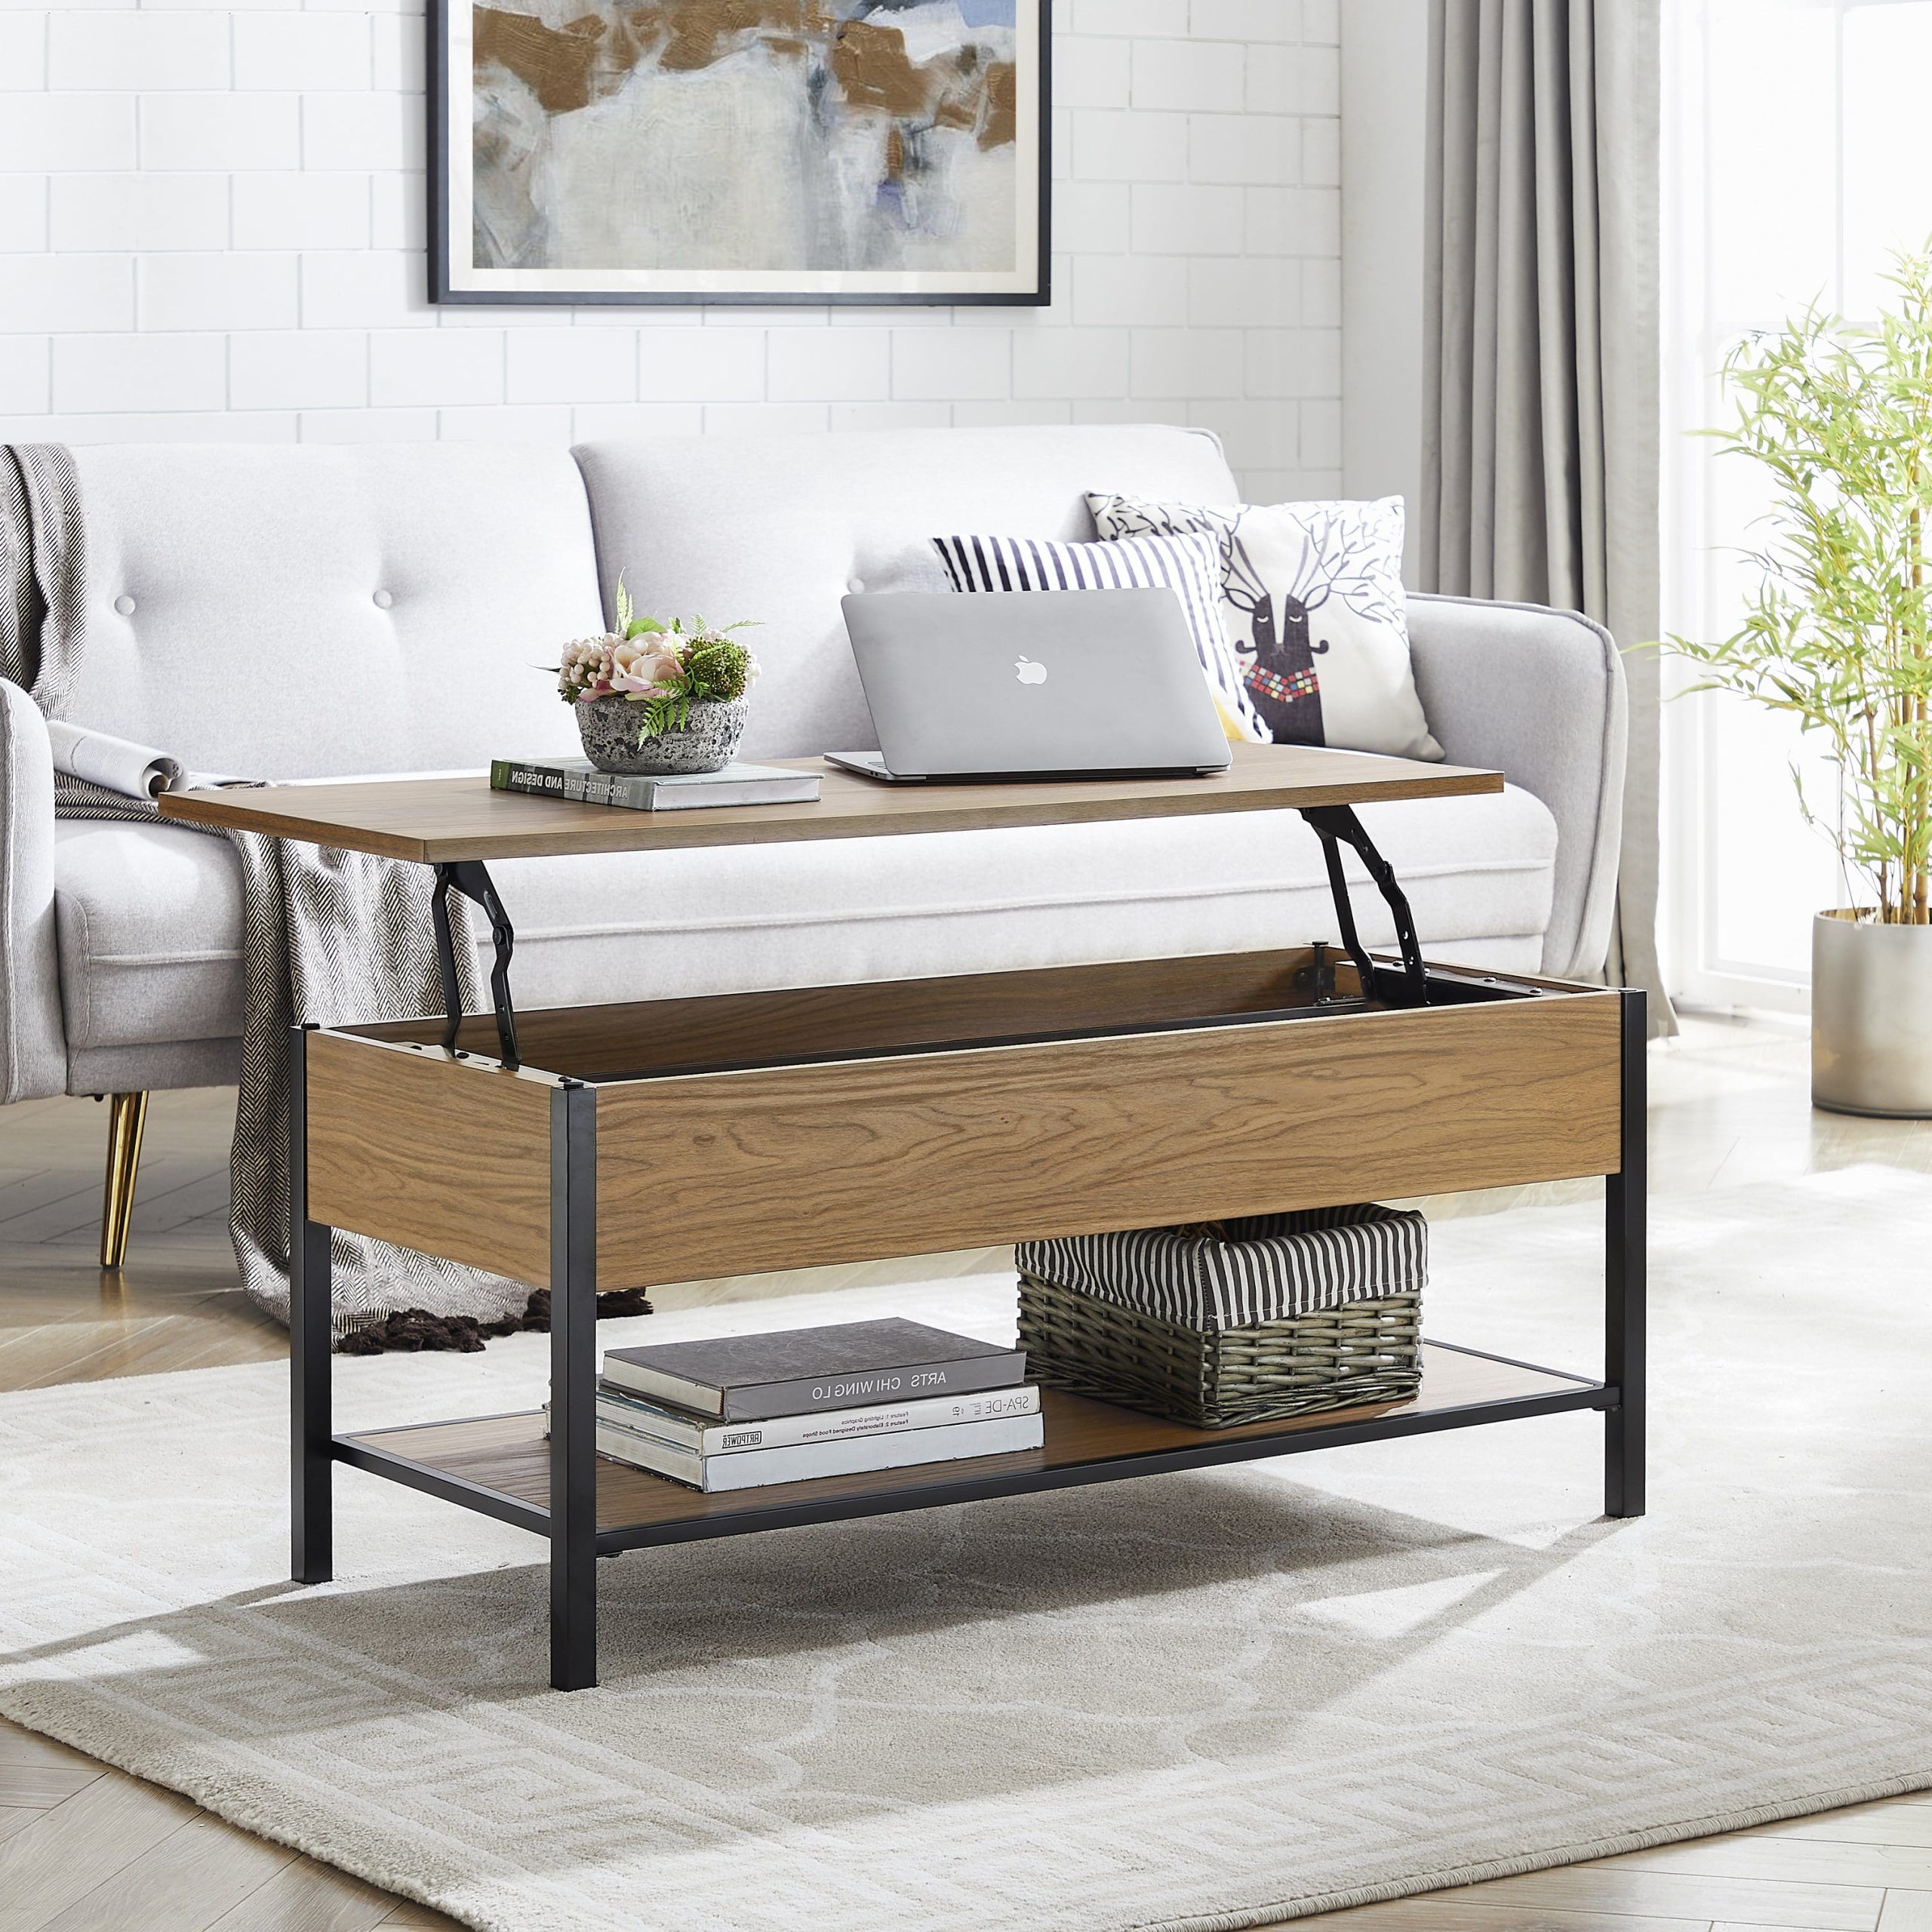 Lift Top Coffee Tables Intended For Most Popular Mainstays Lift Top Coffee Table With Storage, Canyon Walnut – Walmart (Photo 22 of 26)